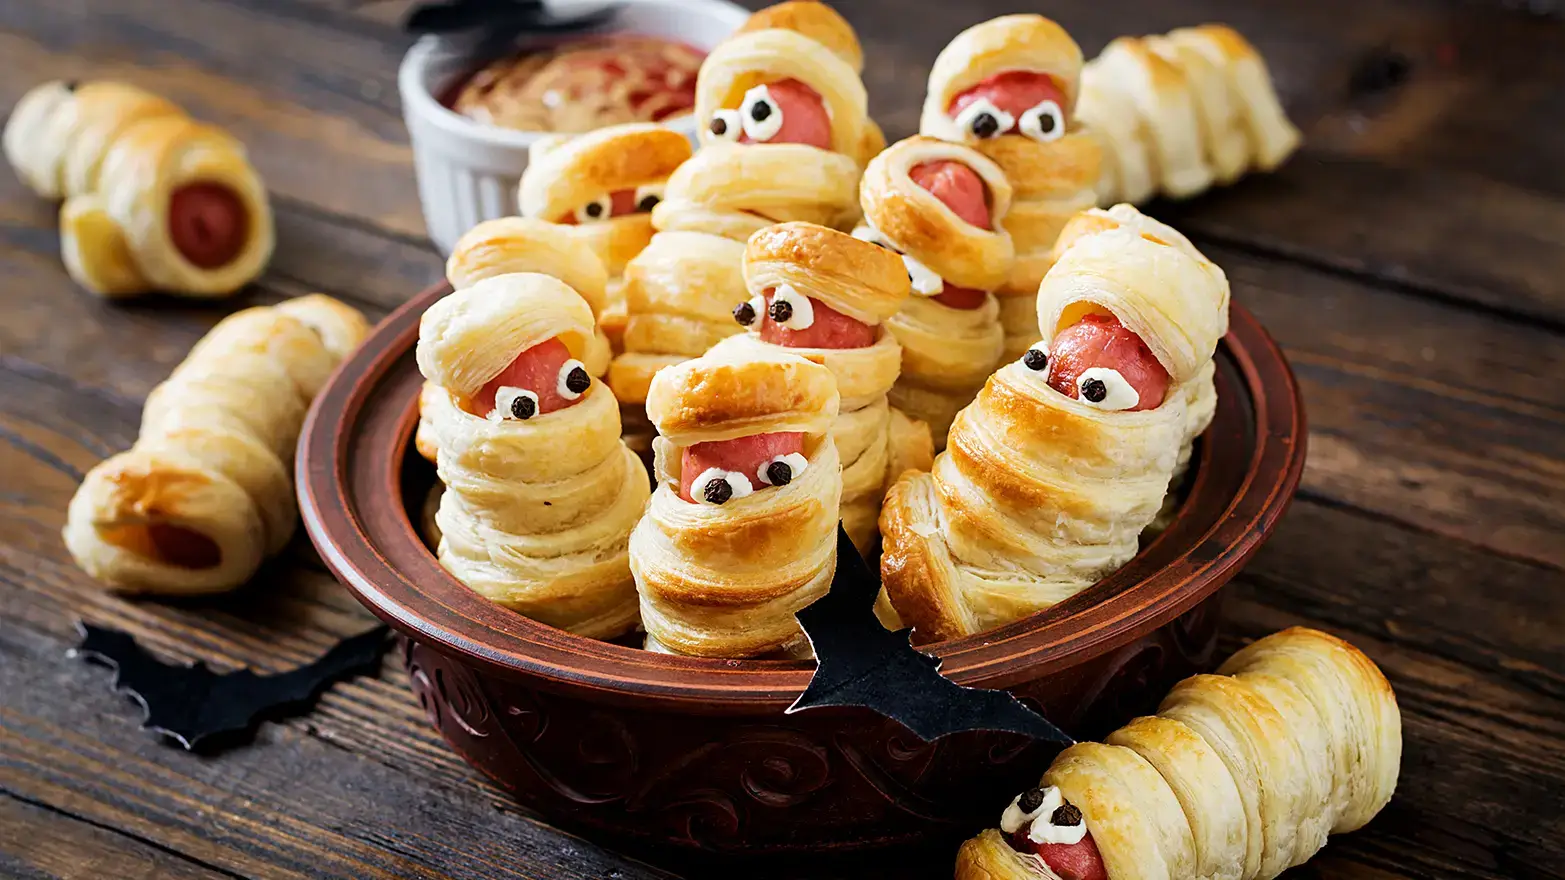 Hot dogs wrapped in pastry dough with edible eyeballs